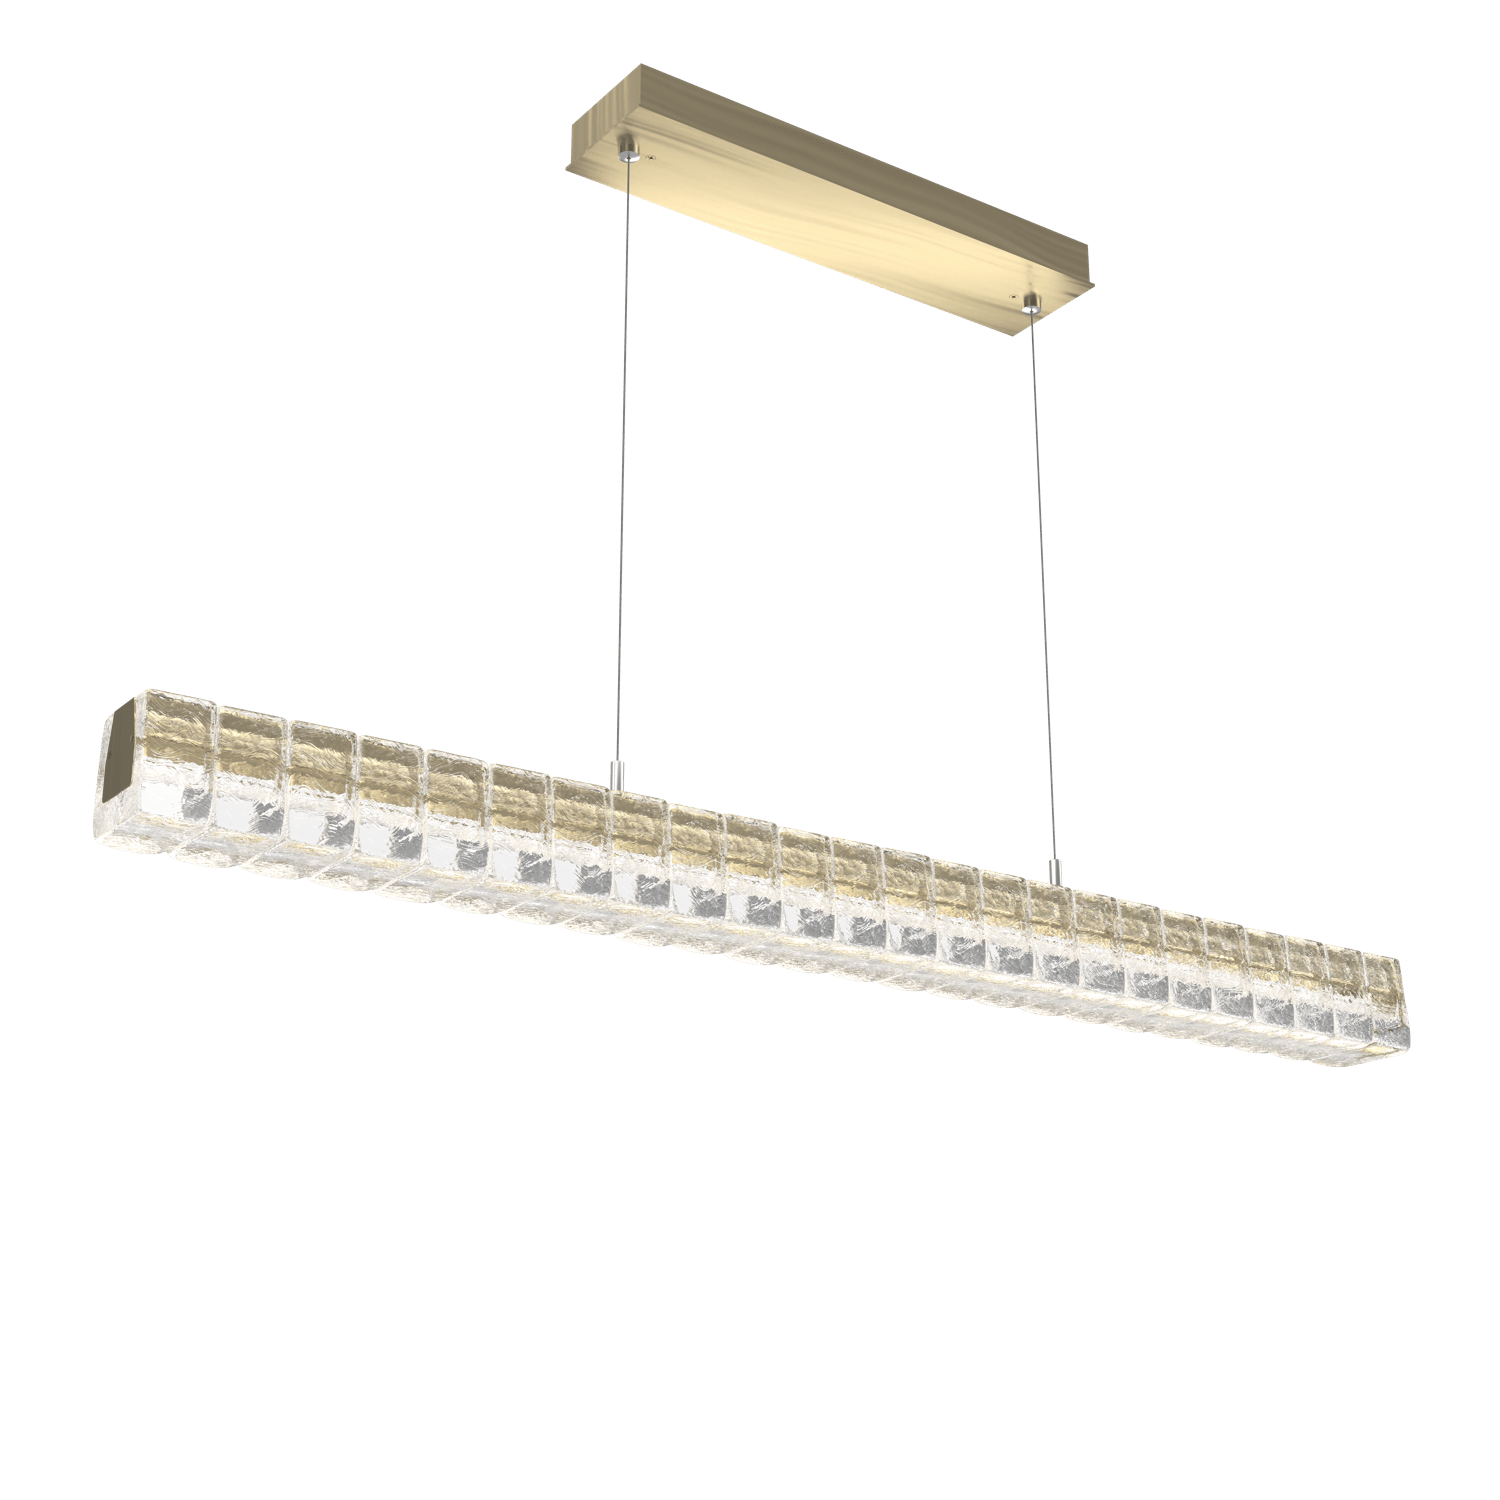 PLB0080-48-HB-Hammerton-Studio-Asscher-48-inch-linear-chandelier-with-heritage-brass-finish-and-clear-cast-glass-shades-and-LED-lamping